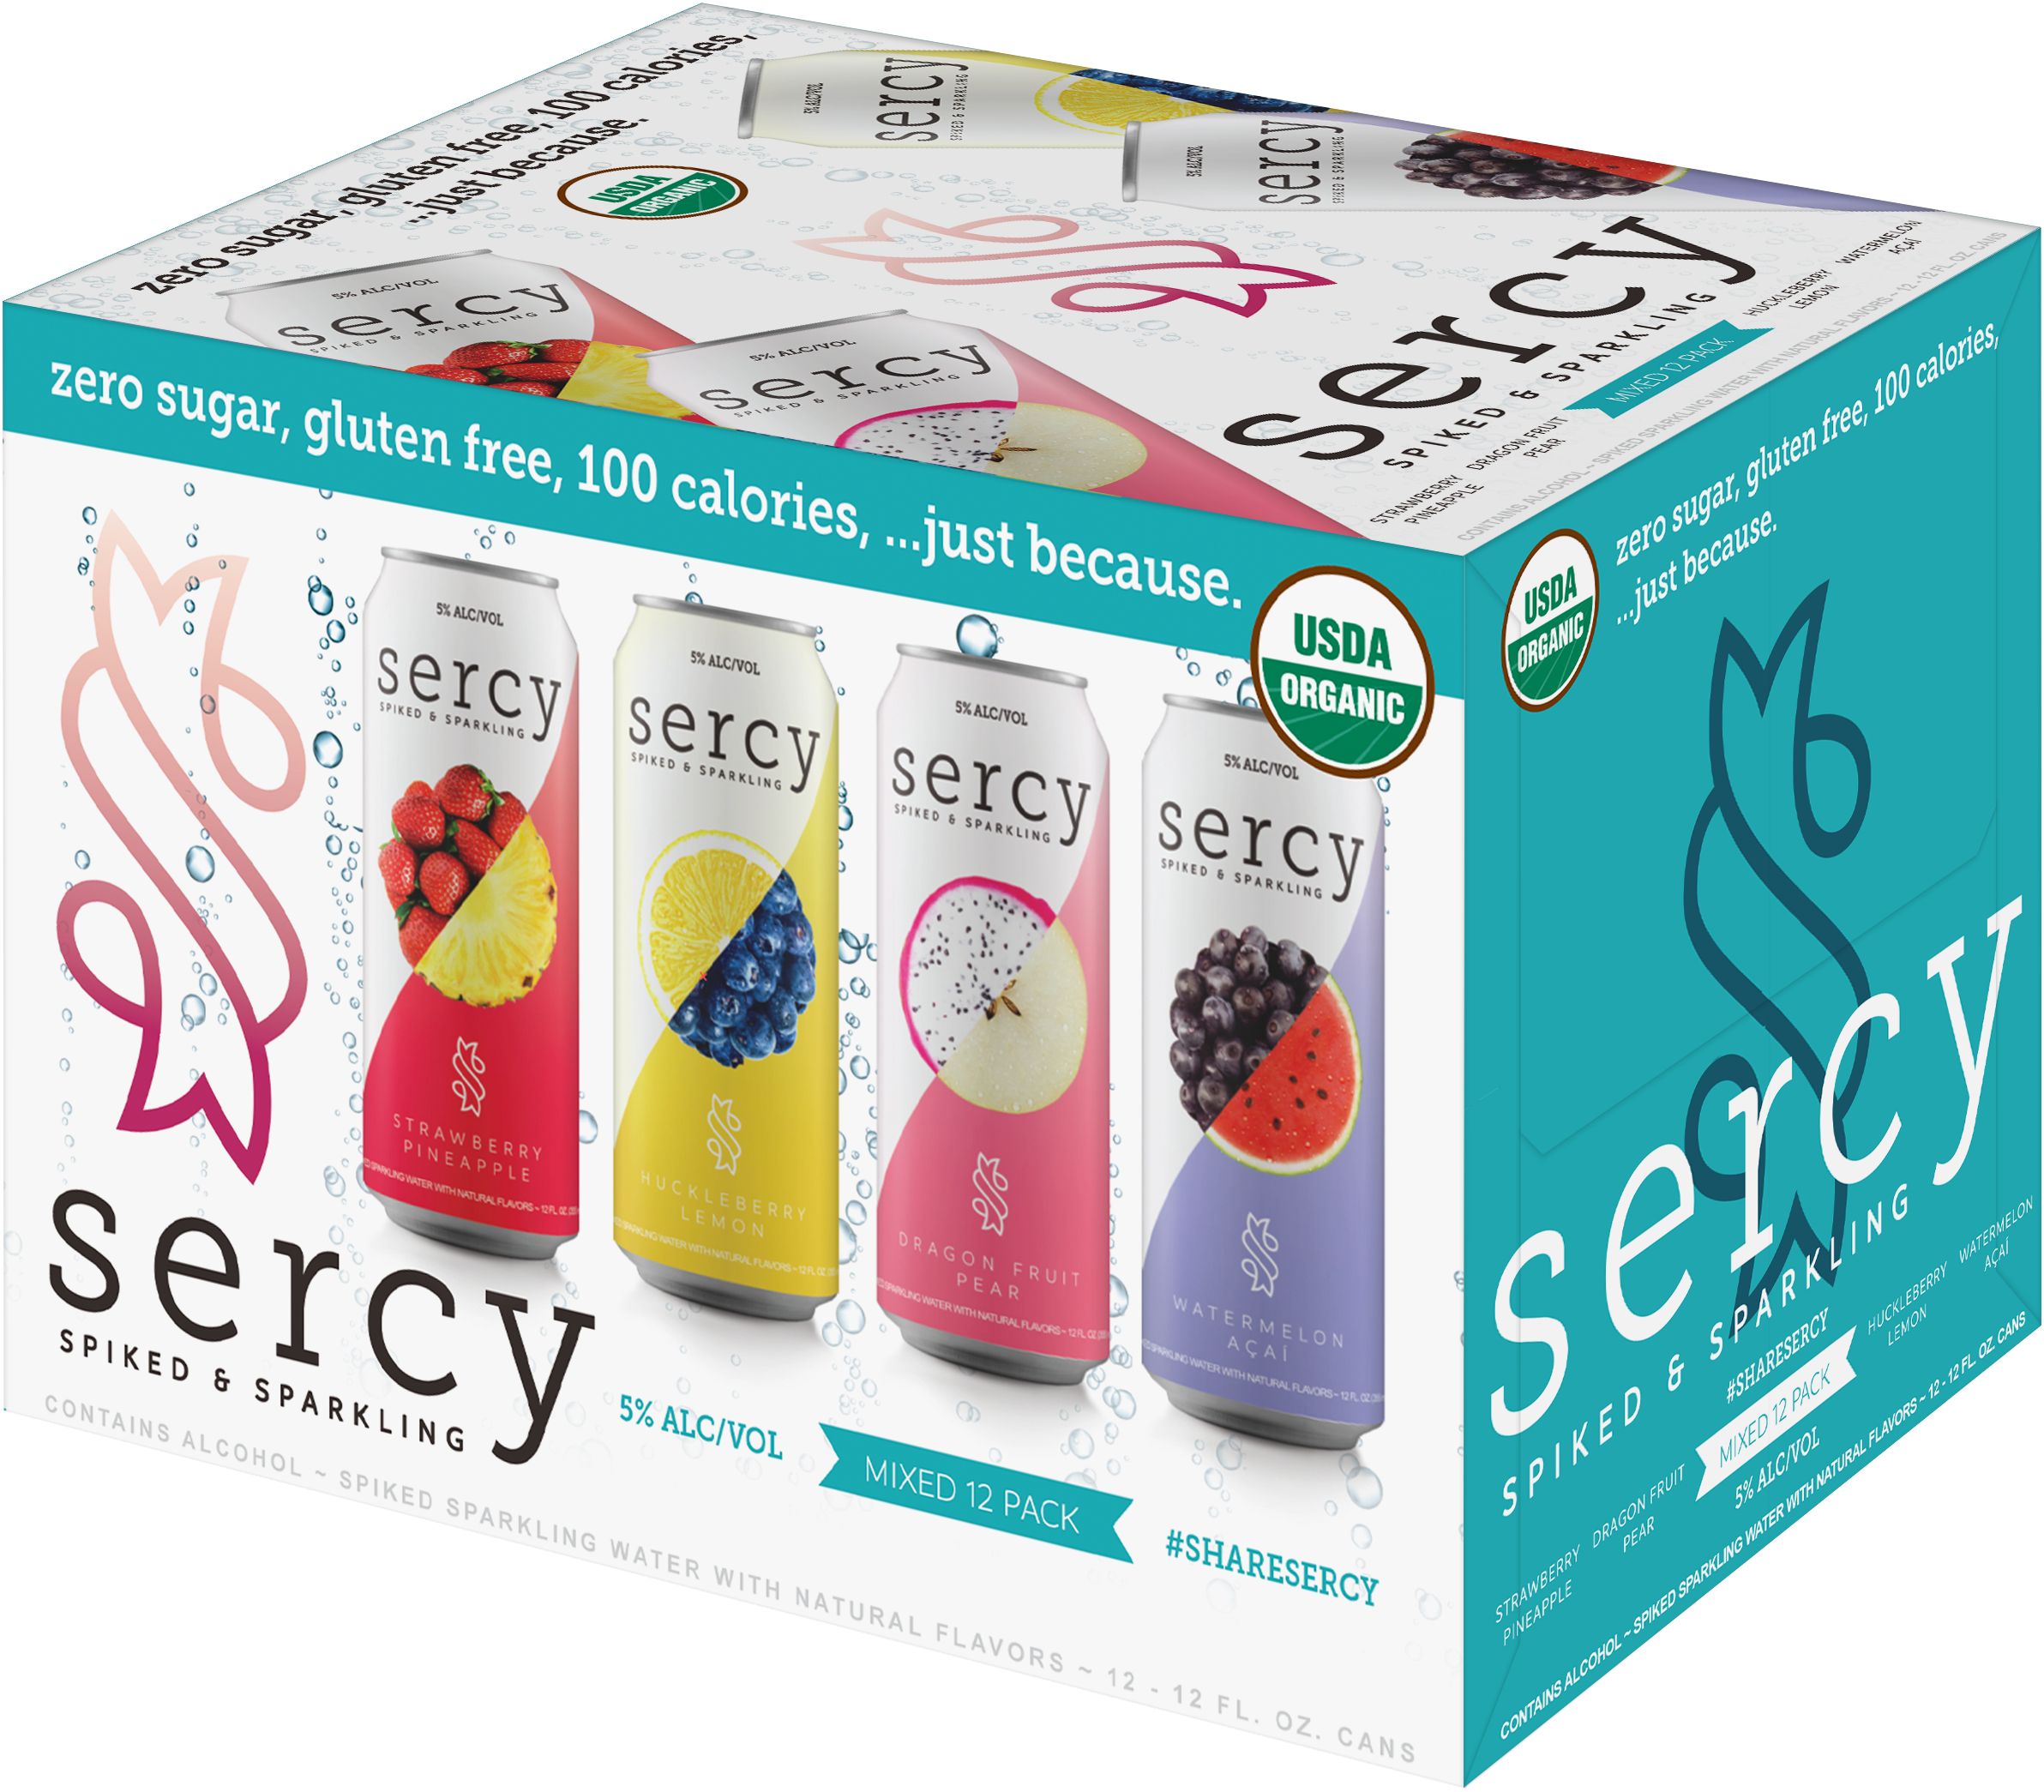 Sercy 12 Pack Mockup New Flavors